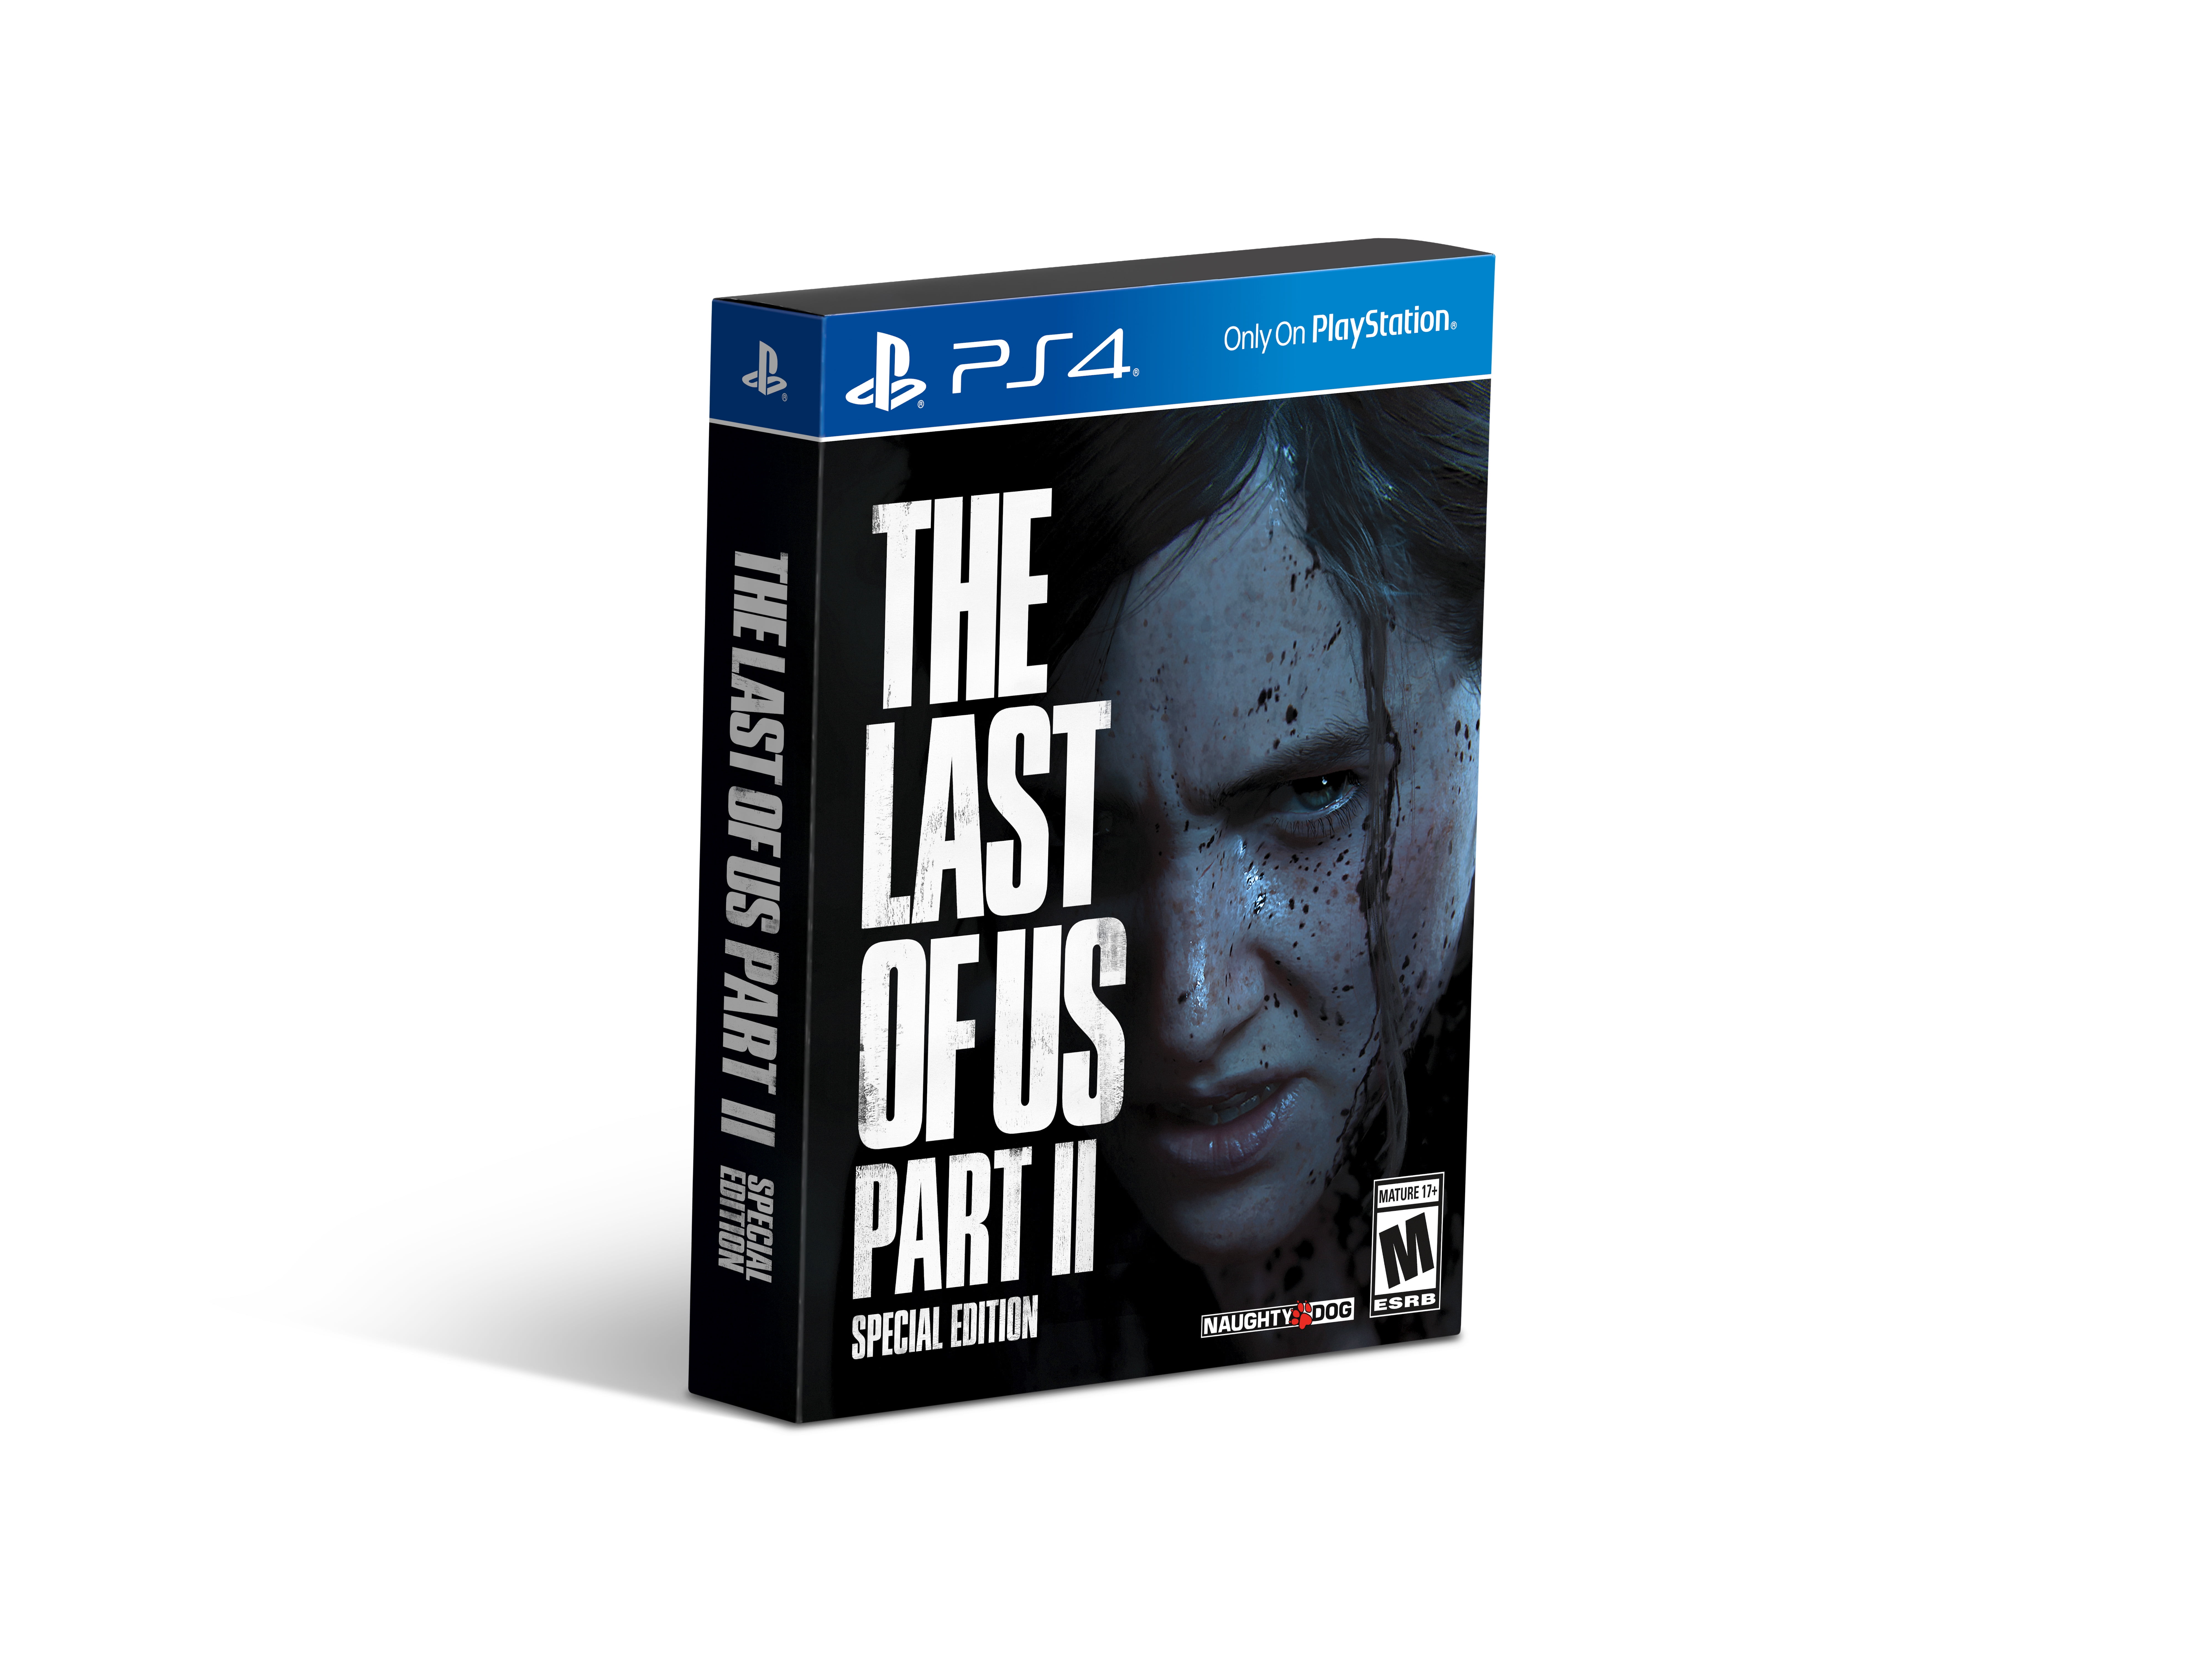 The of Part II Special Sony, Playstation 4 -